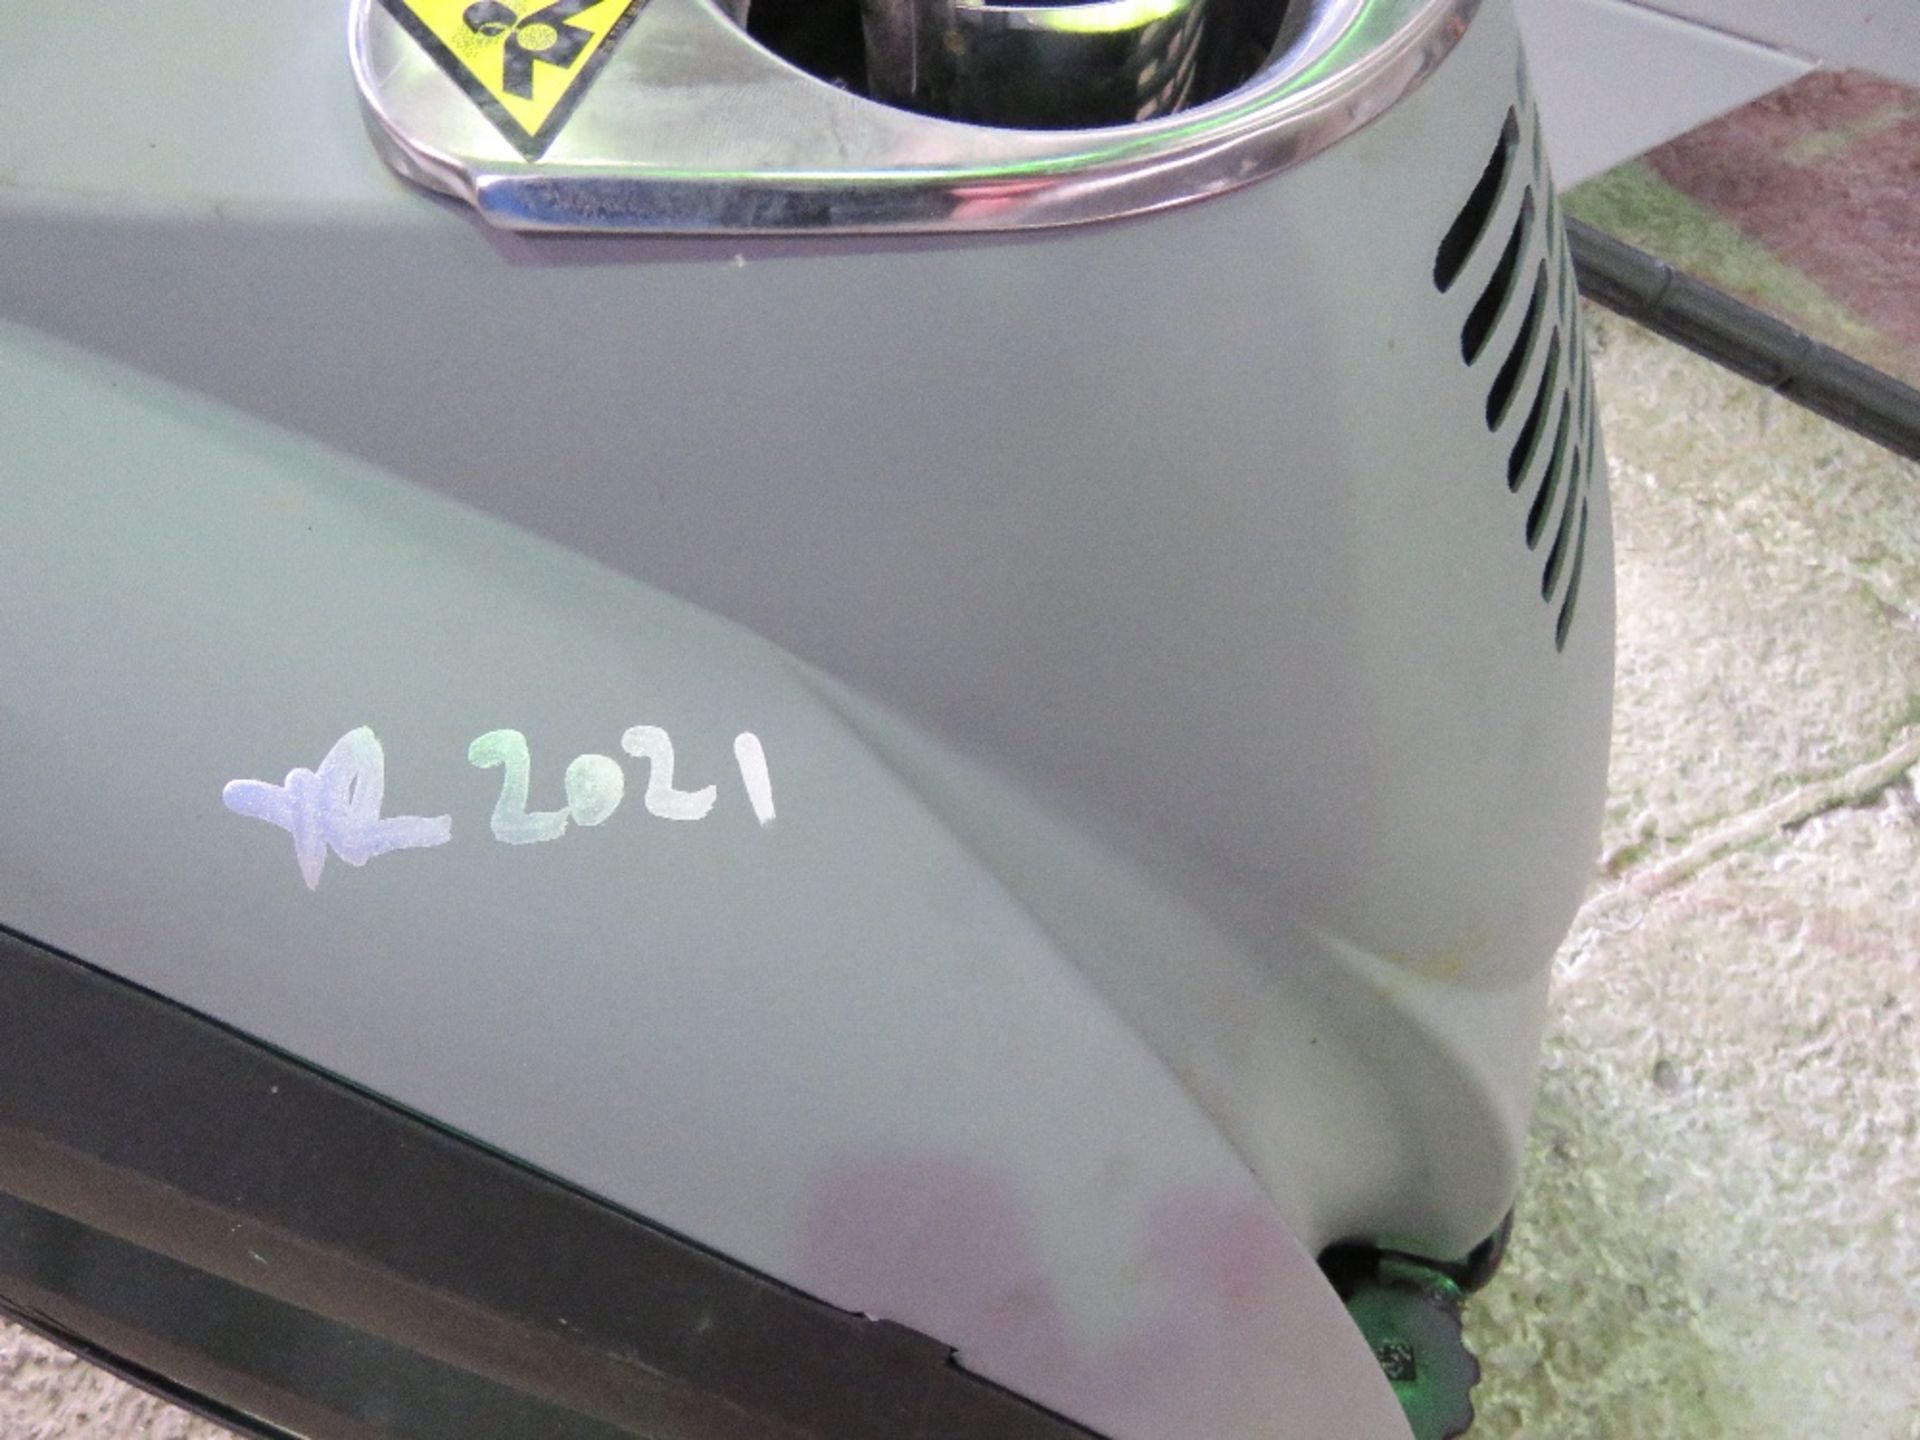 LAVOR 58KW PROFESSIONAL STEAM CLEANER, 240 VOLT, LITTLE USED SINCE PURCHASE IN SEPTEMBER 2021. WITH - Image 5 of 6